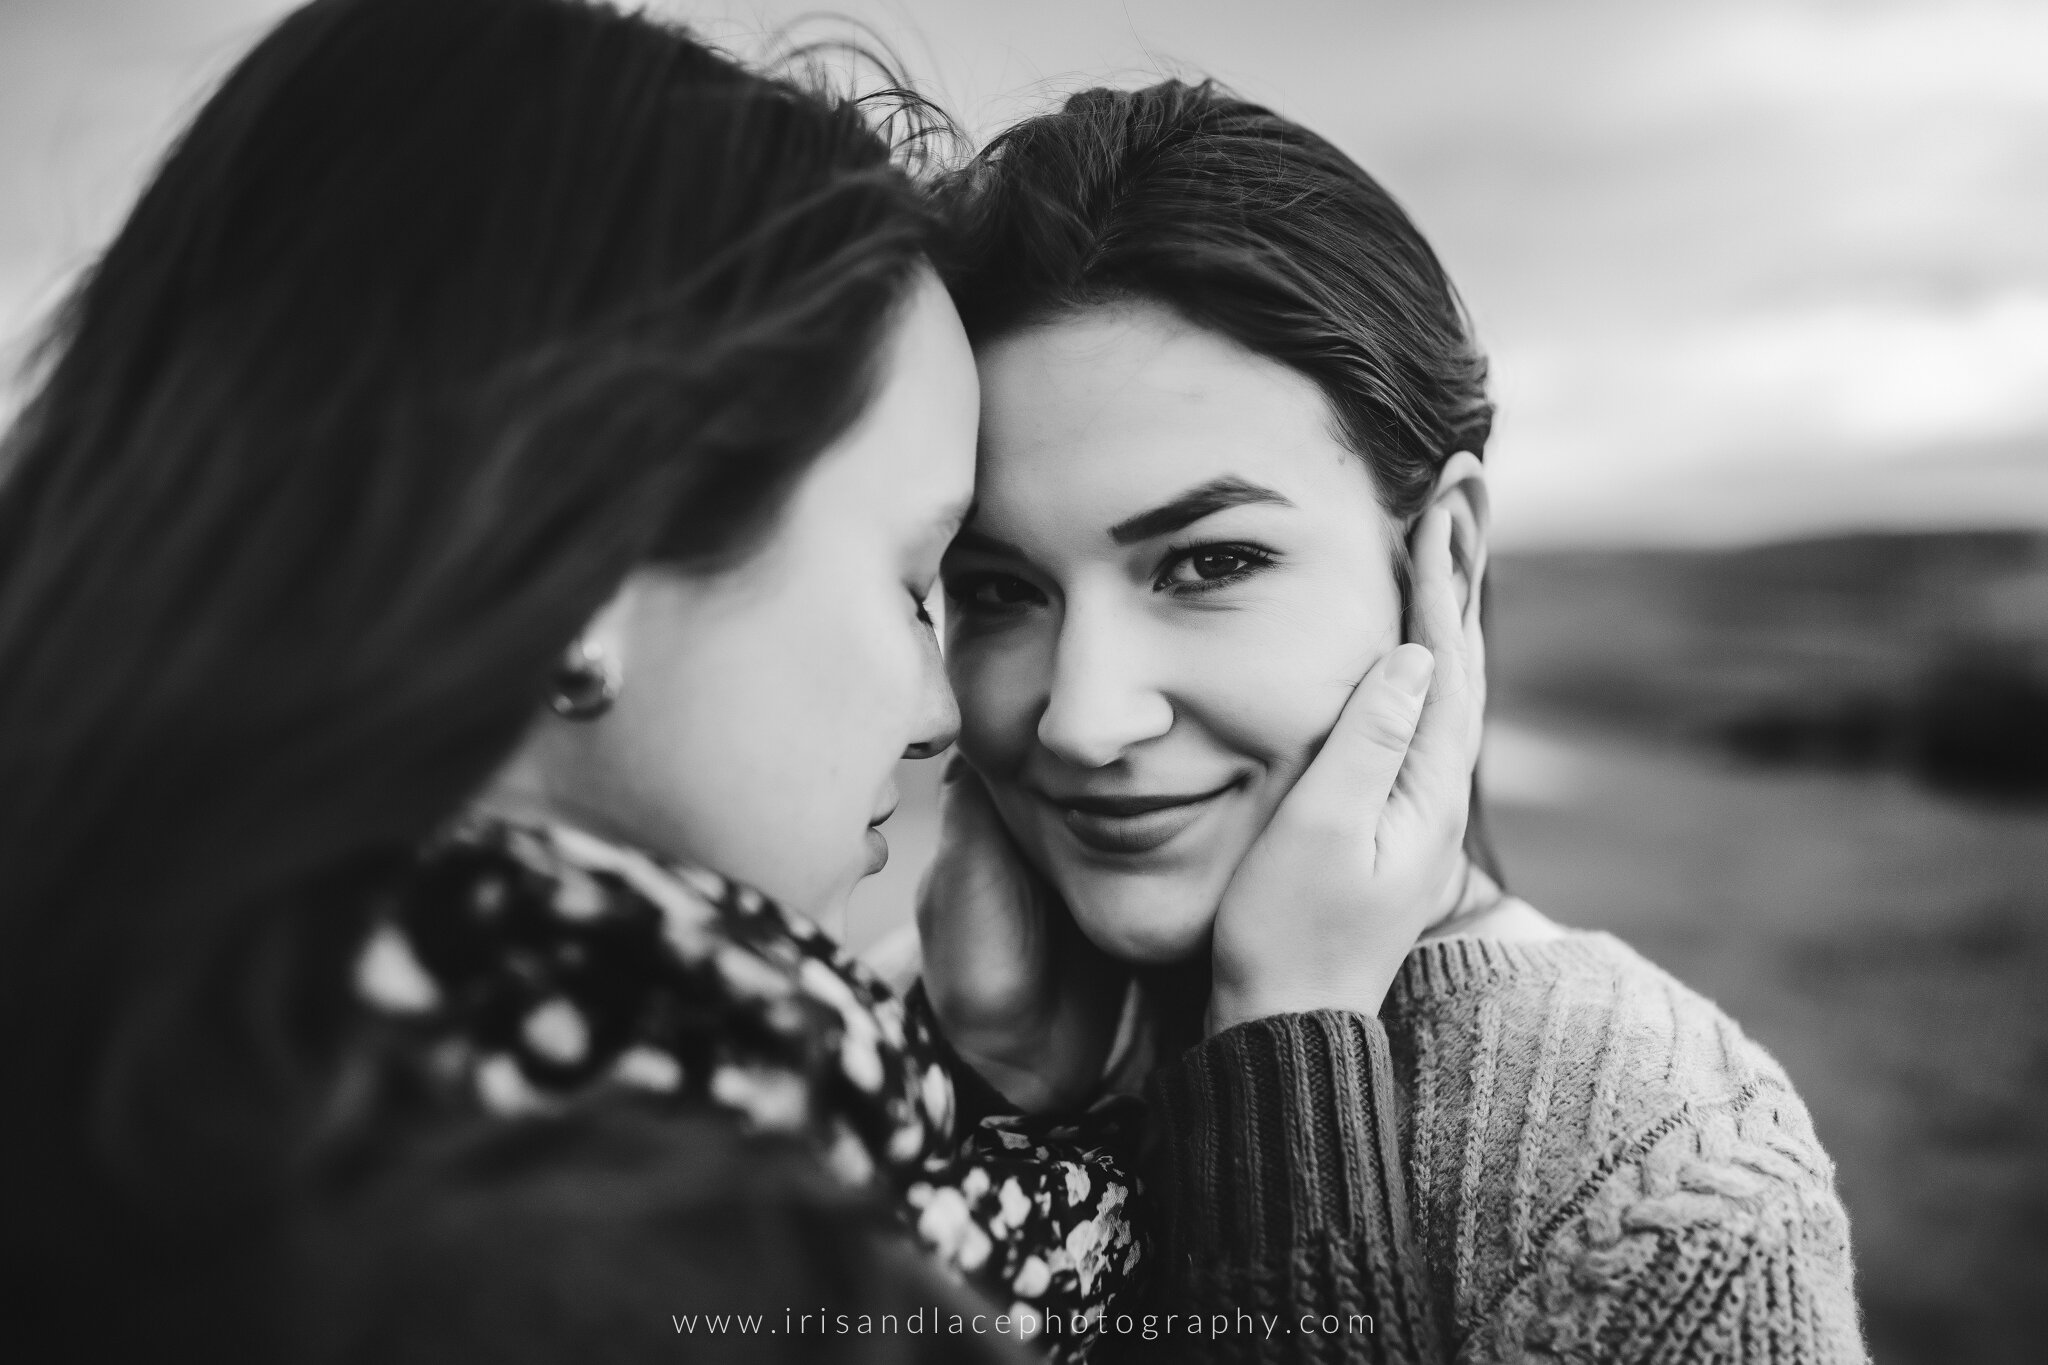 Lifestyle Photography for Same Sex Couples  |  LGBTQ+ Couples Photos   |  Iris and Lace Photography